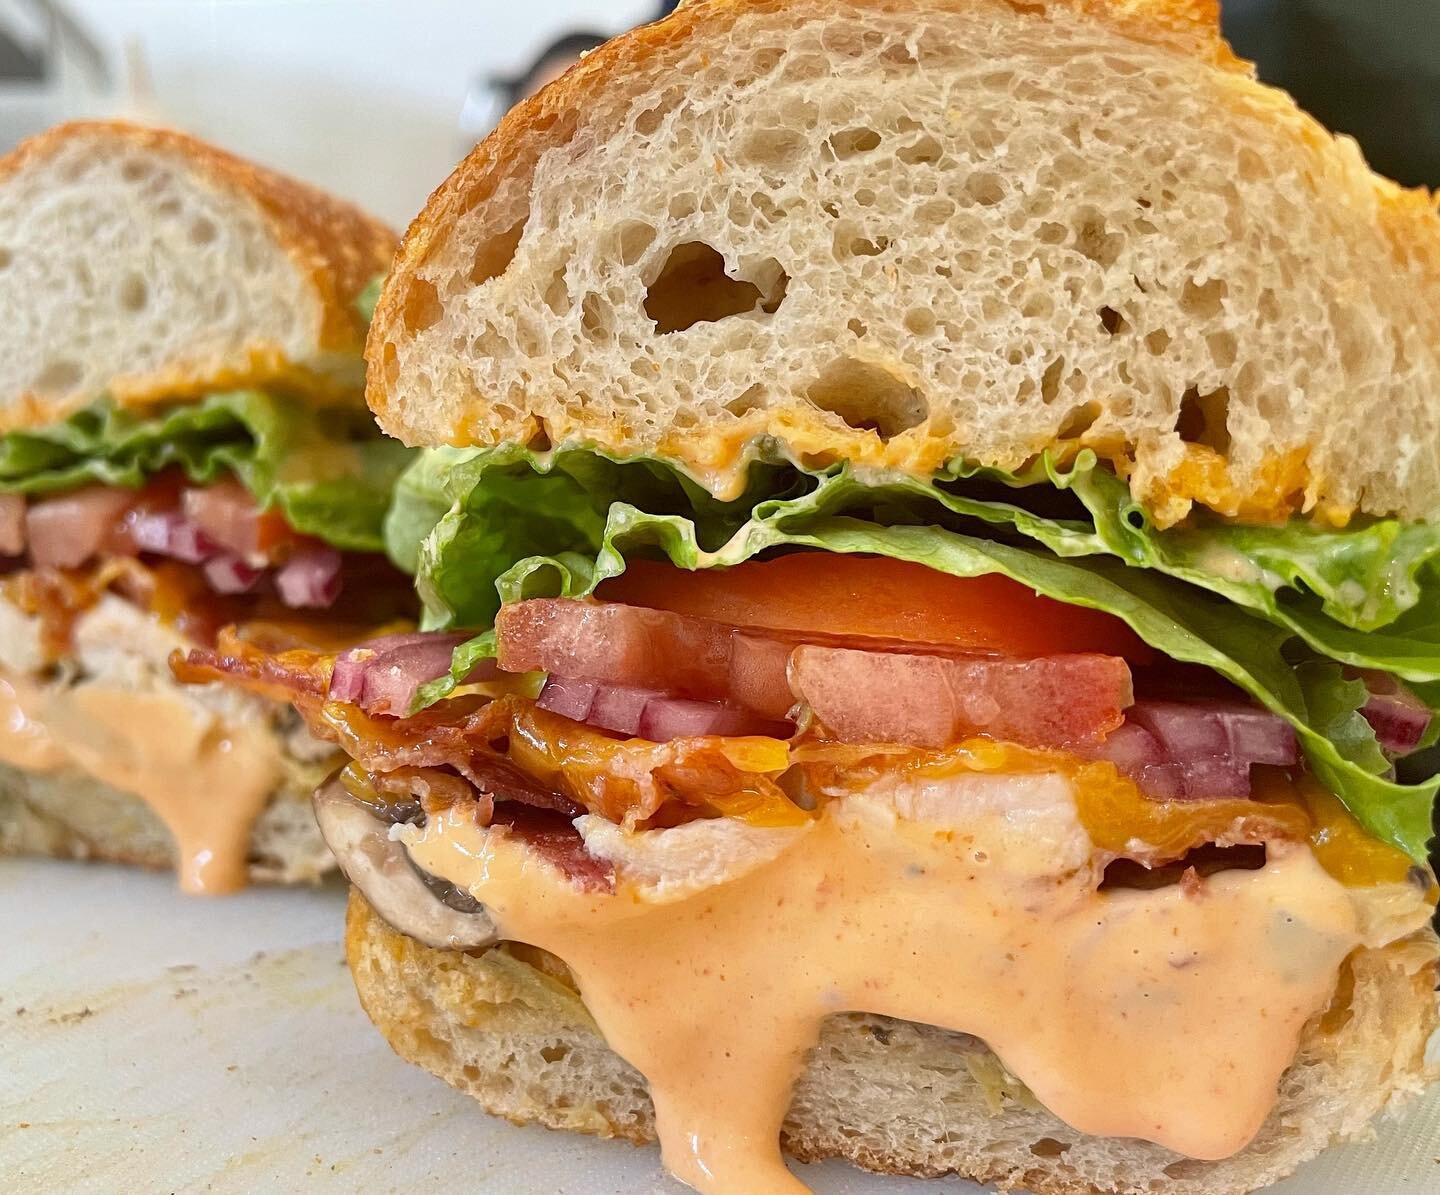 This post is for everyone who like sandwiches 😉#qssandwichshop #sfsandwiches #eater #sf #eats #sffoodie